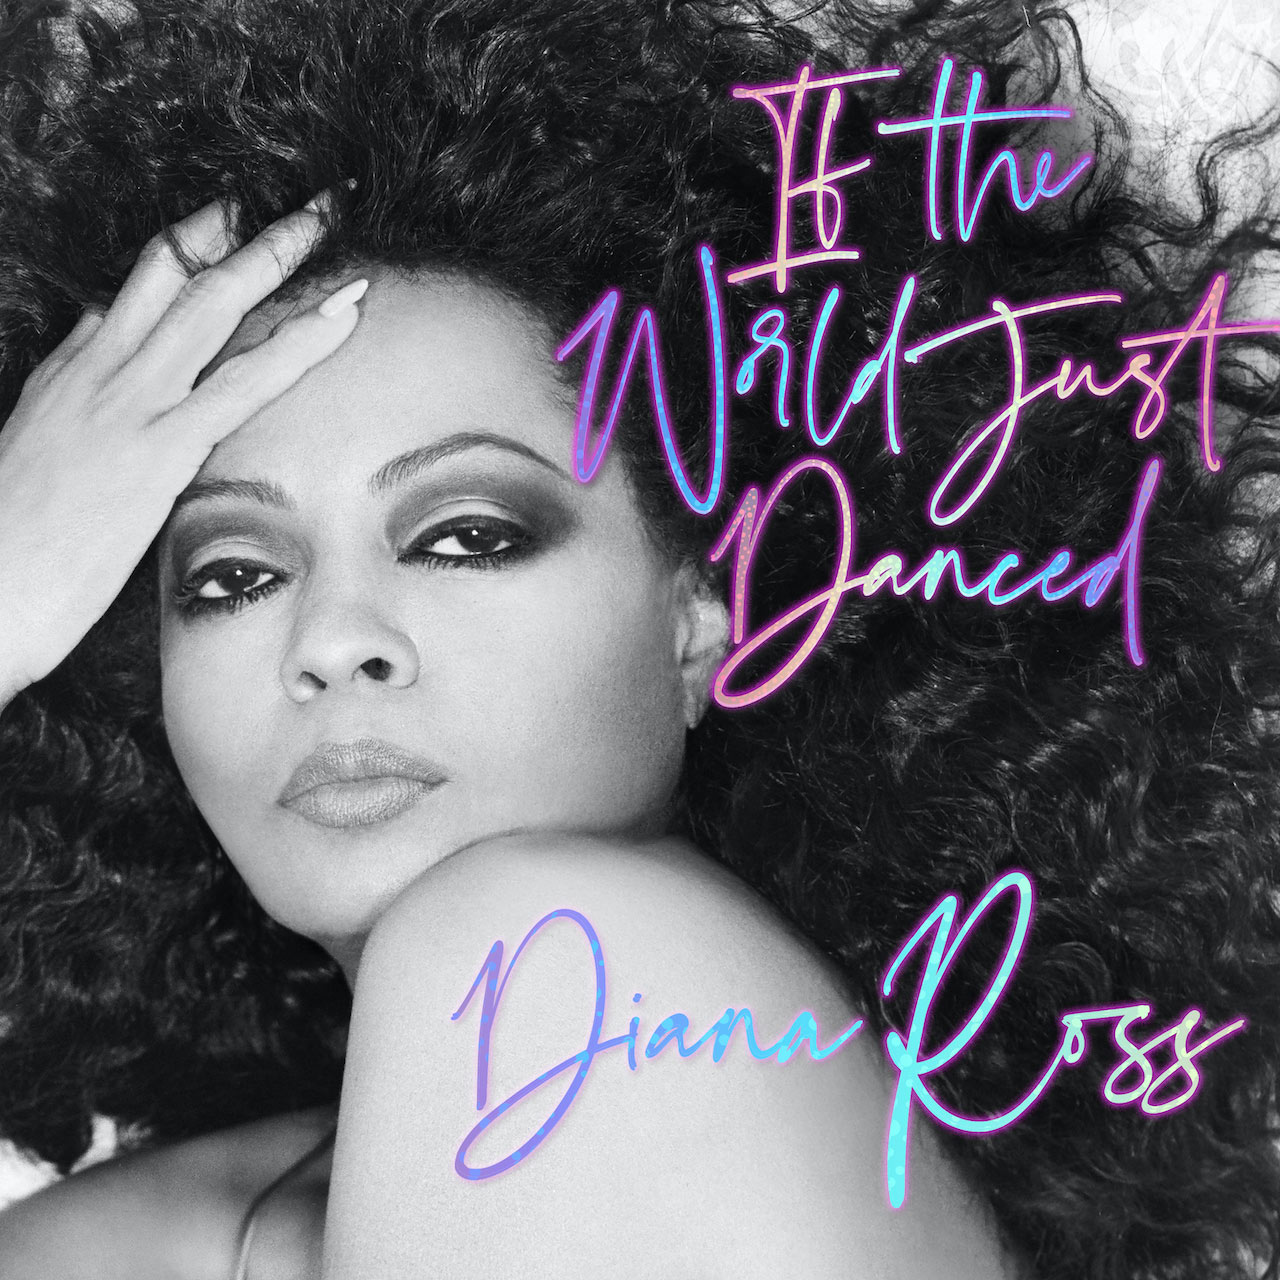 Lyric ross related to diana ross